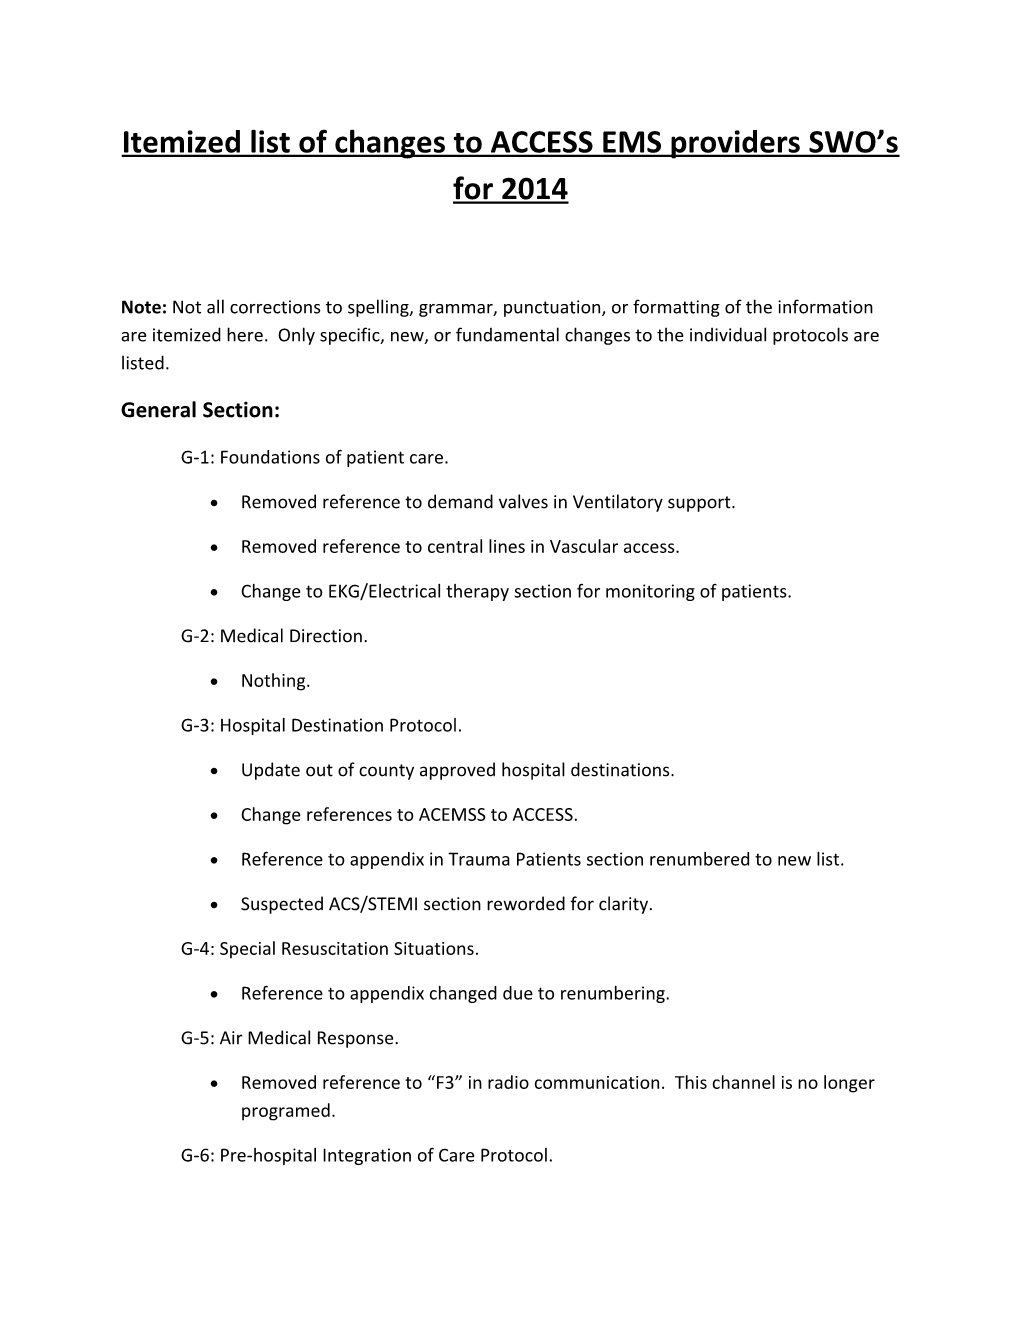 Itemized List of Changes to ACCESS EMS Providers SWO S for 2014